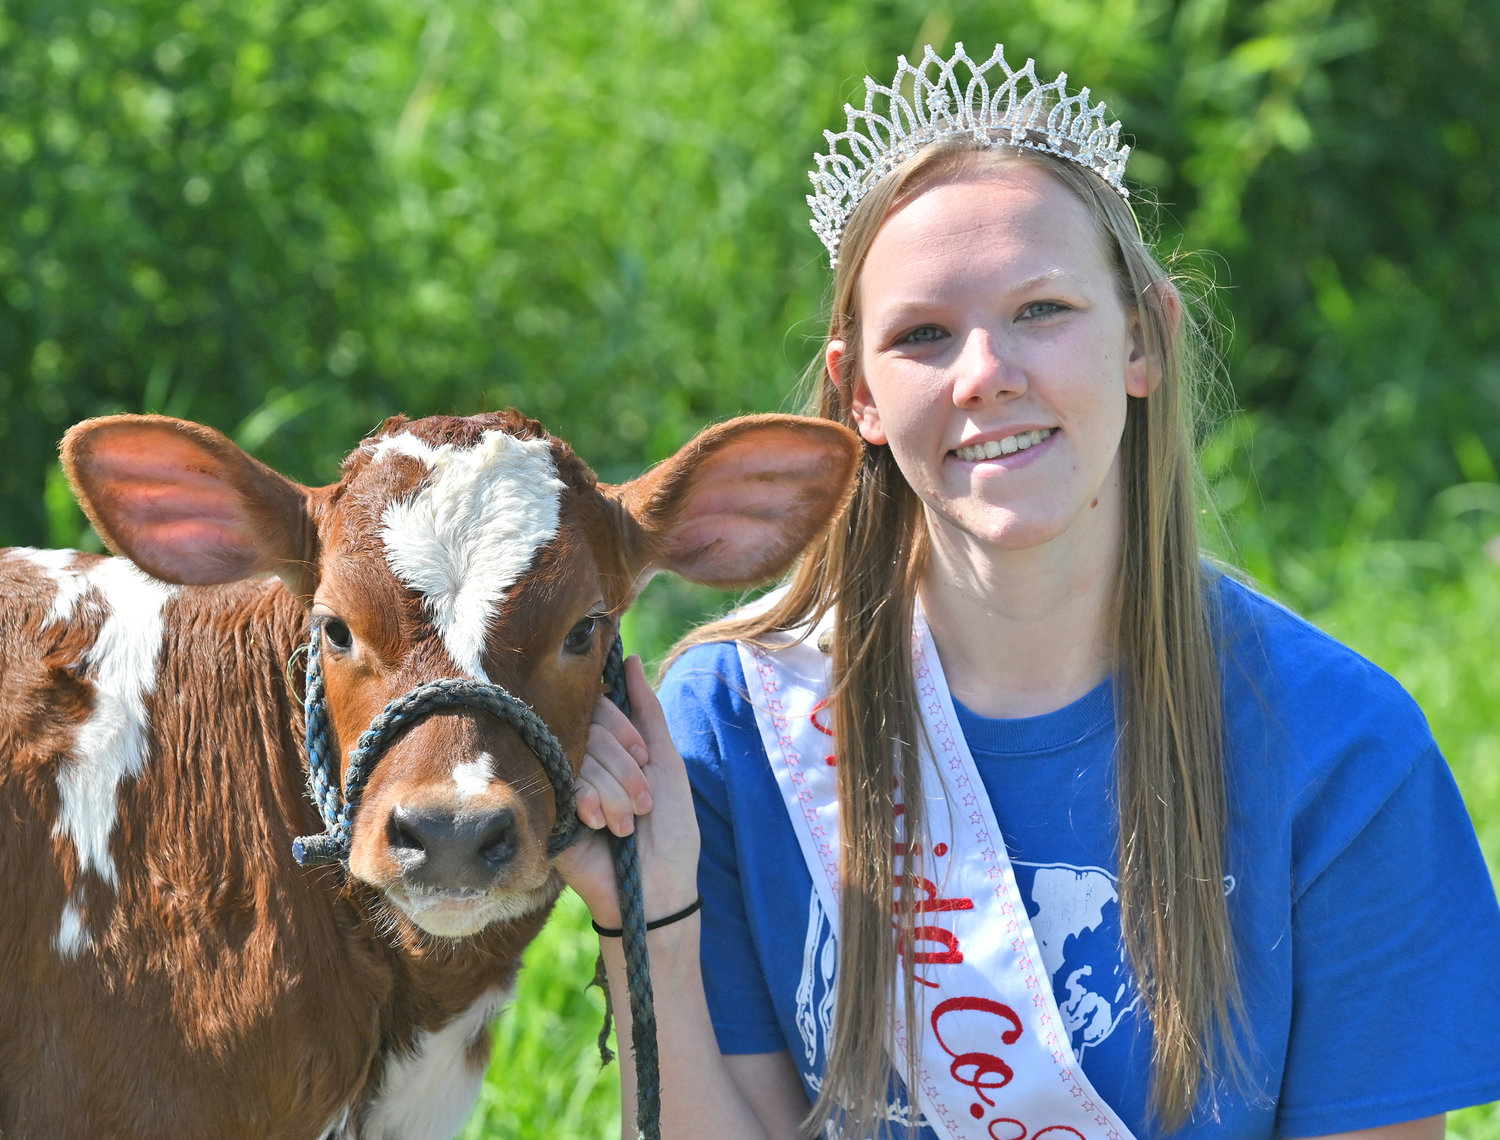 SAY CHEESE? — Oneida County Dairy Princess Shelby Carrigan takes a brief break from her chores to pose for a photo with Melinda, an Ayrshire calf. Carrigan’s chores on the farm include feeding and caring for calves like Melinda.